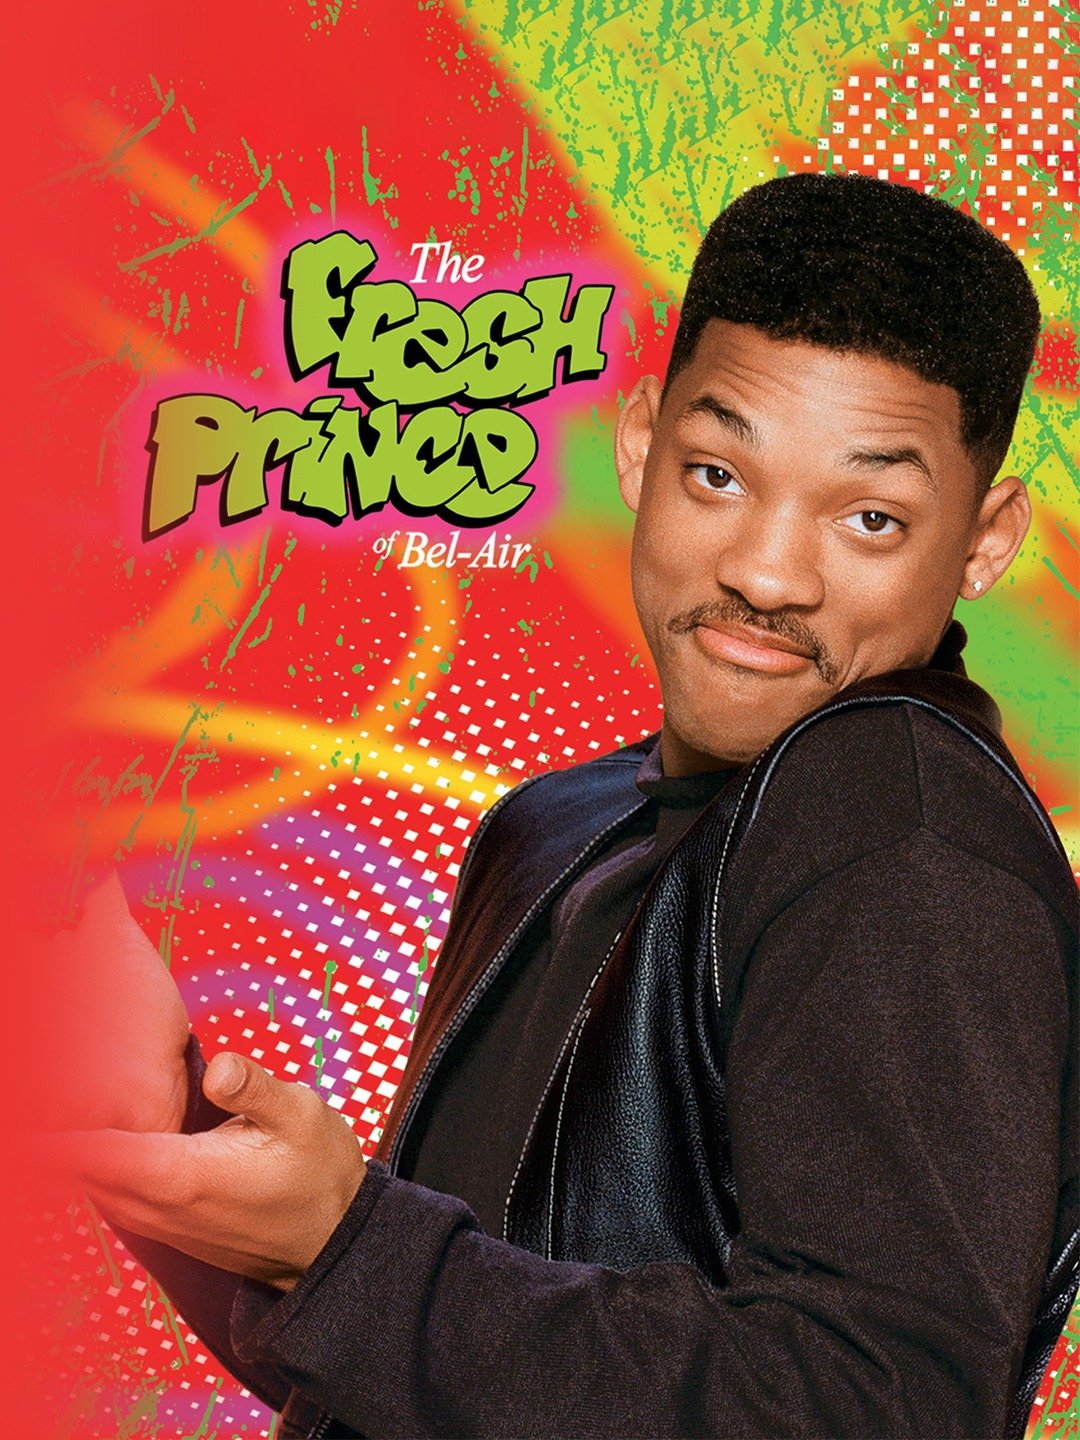 fresh prince of bel air episodes for free